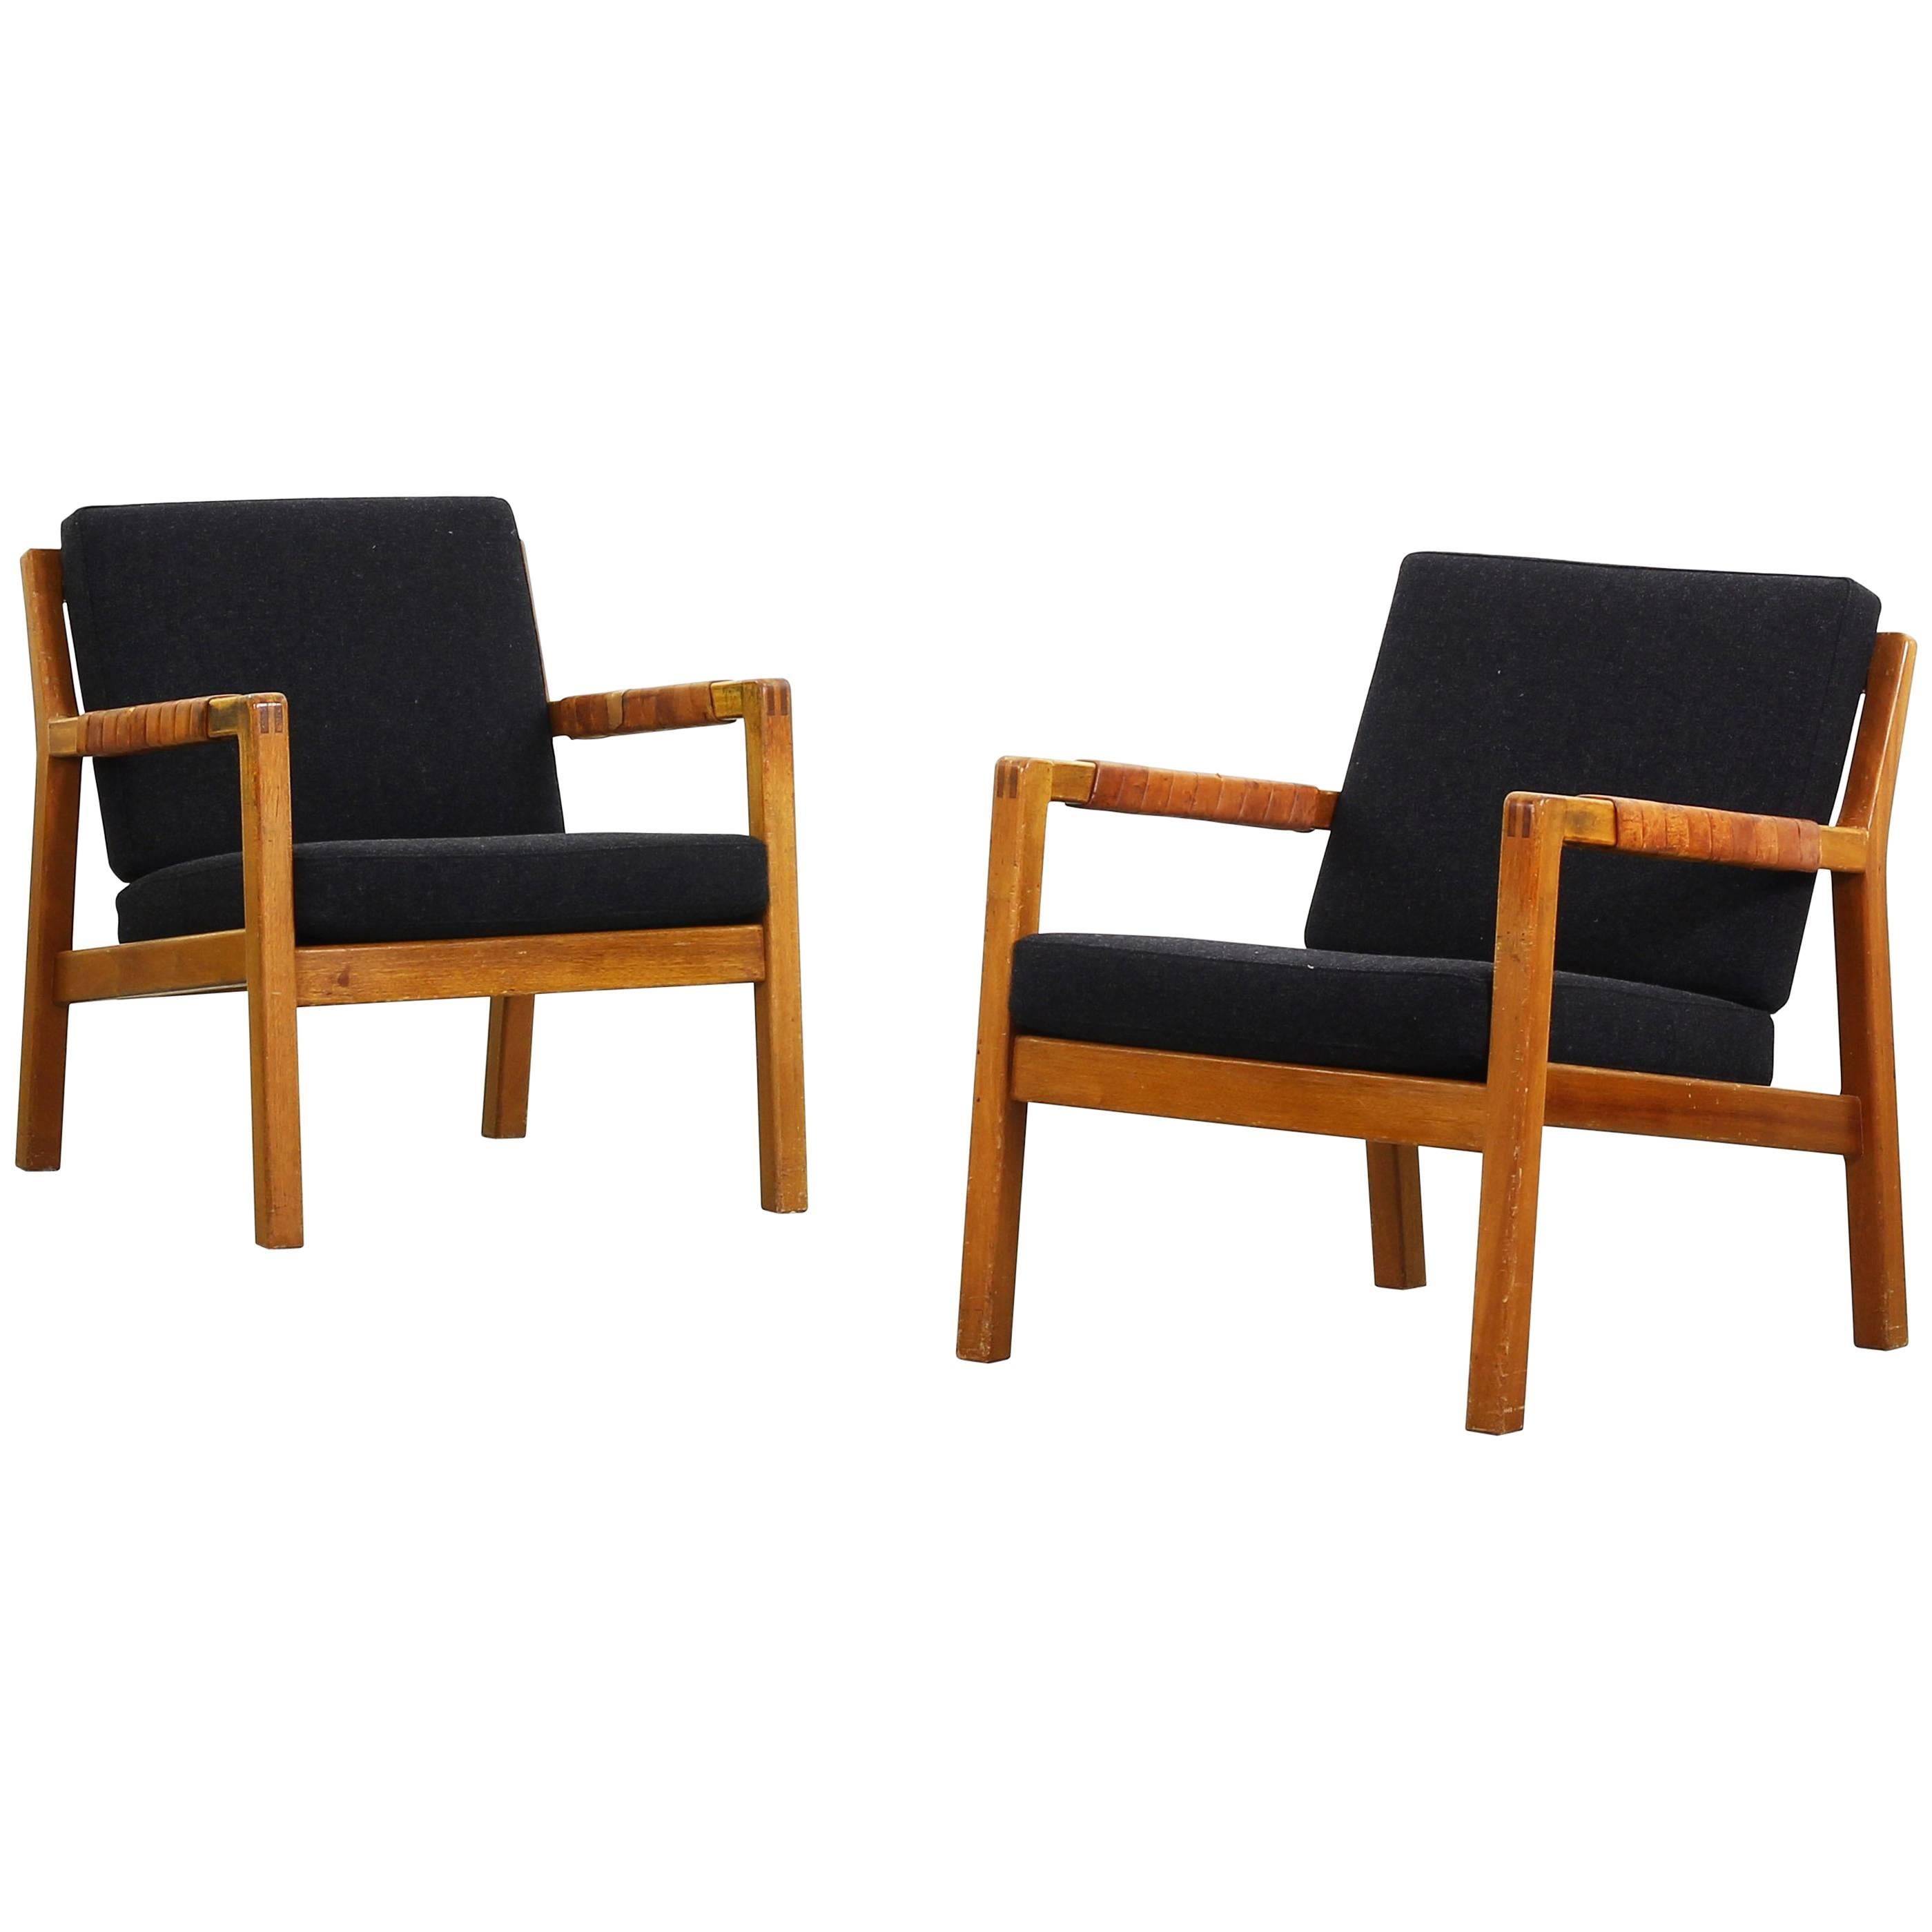 Beautiful Pair of Easy Lounge Chairs by Carl Gustaf Hiort af Örnas, Finland